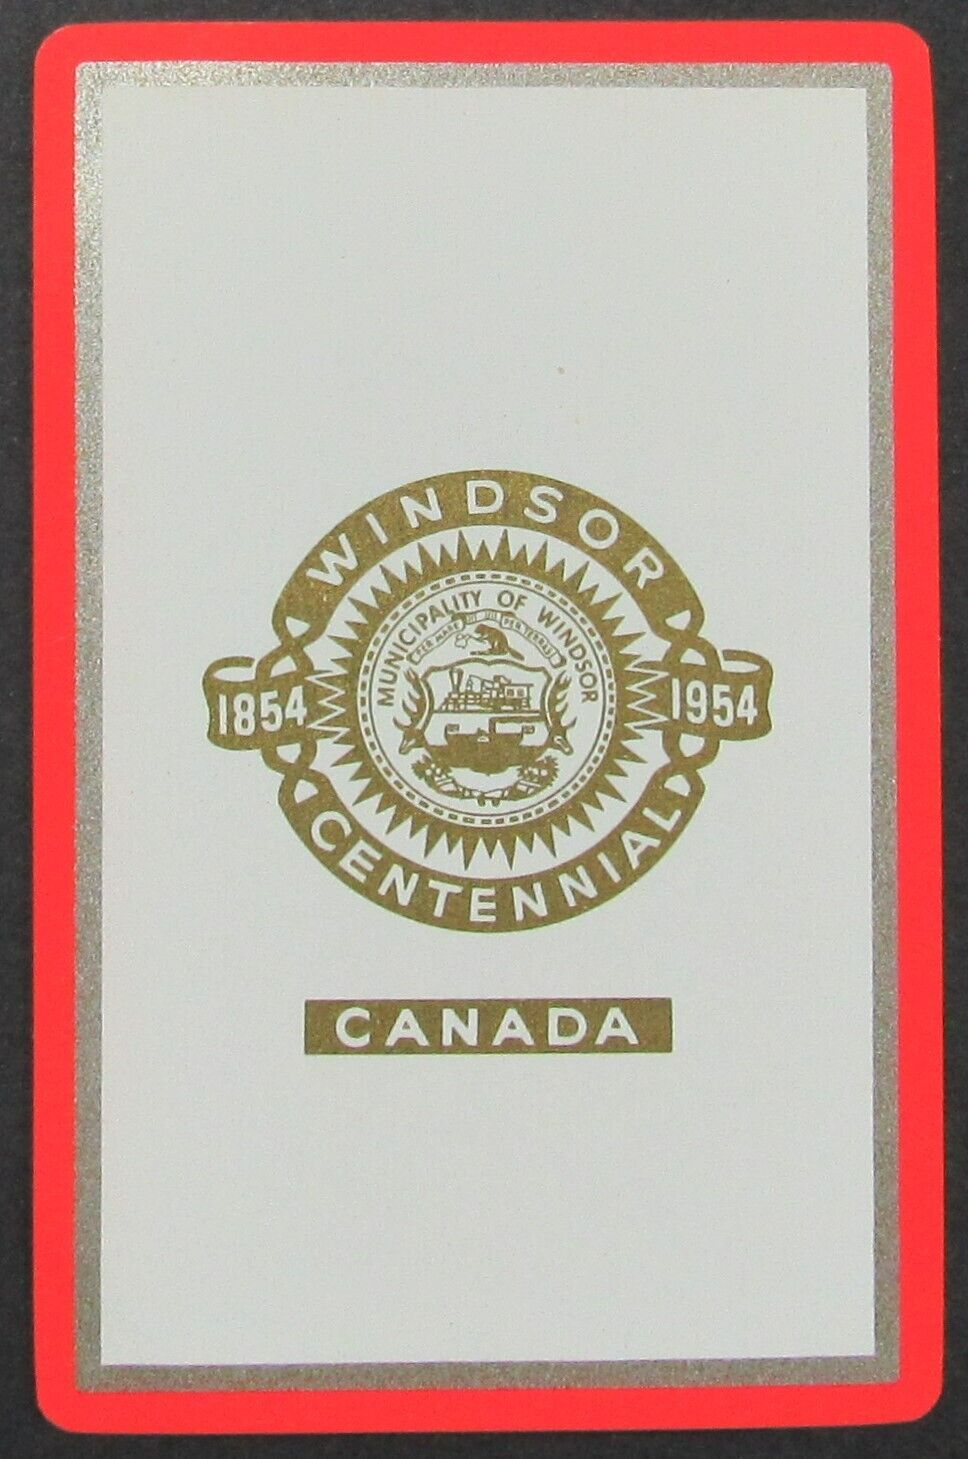 Windsor Centennial Canada 1854-1954 Vintage Single Swap Playing Card Ace Hearts